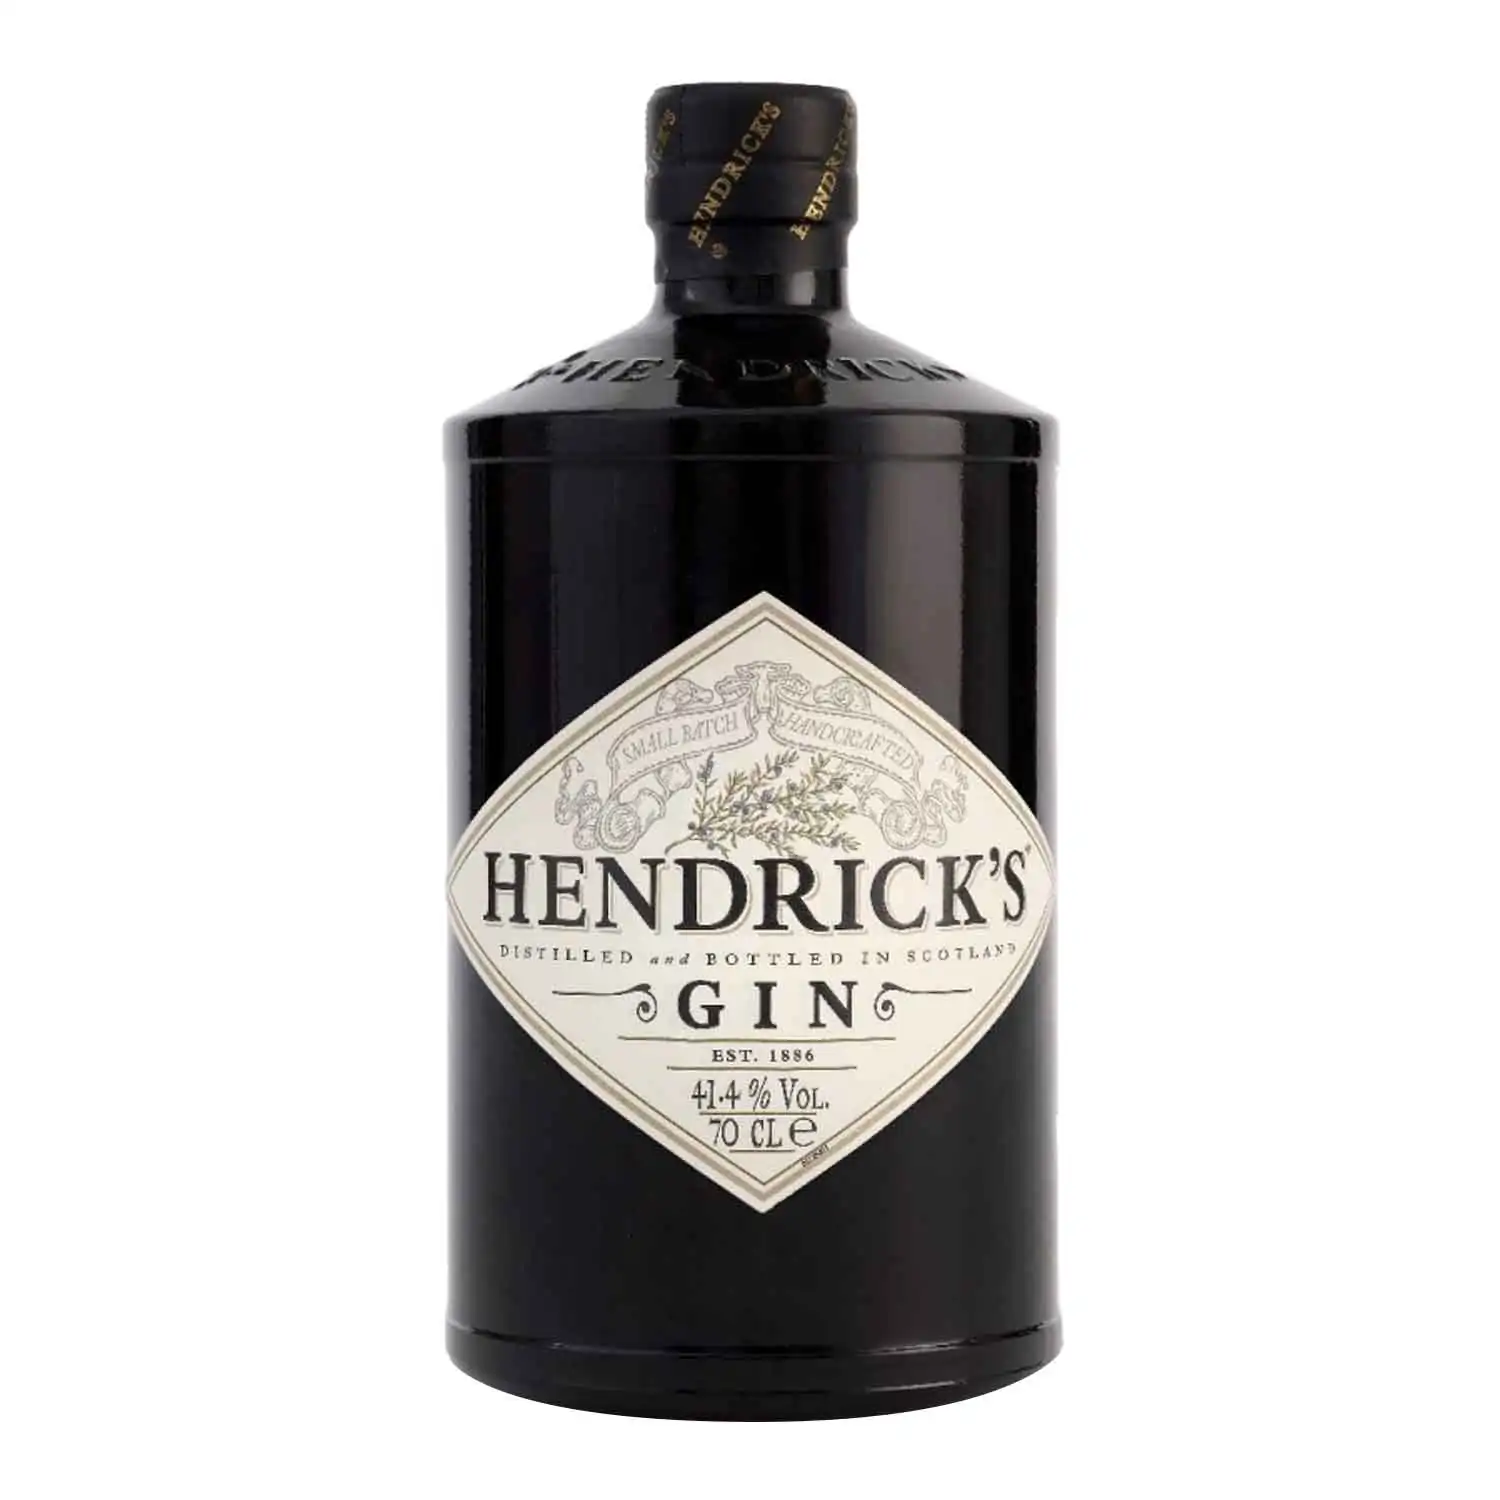 Hendrick's 70cl Alc 41,4% - Buy at Real Tobacco